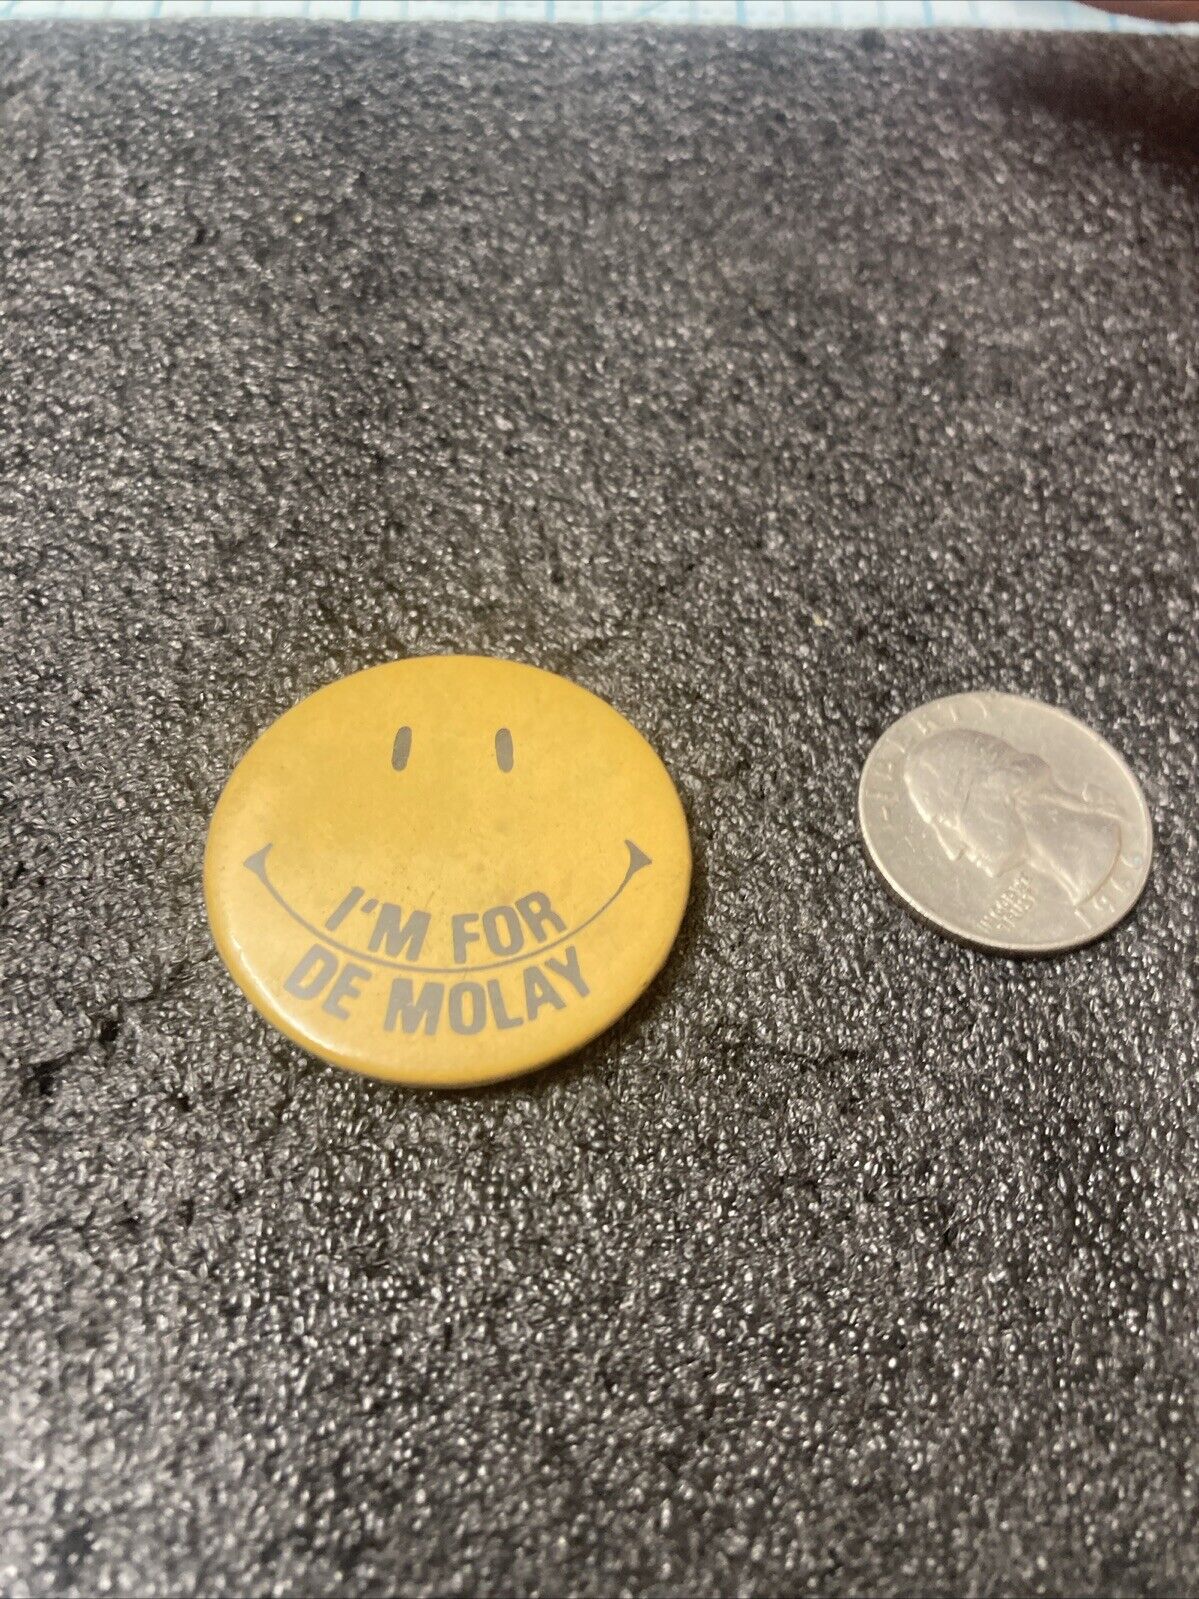 USED Vintage I\'m For De Molay Happy Face Pinback Pin 1.5\